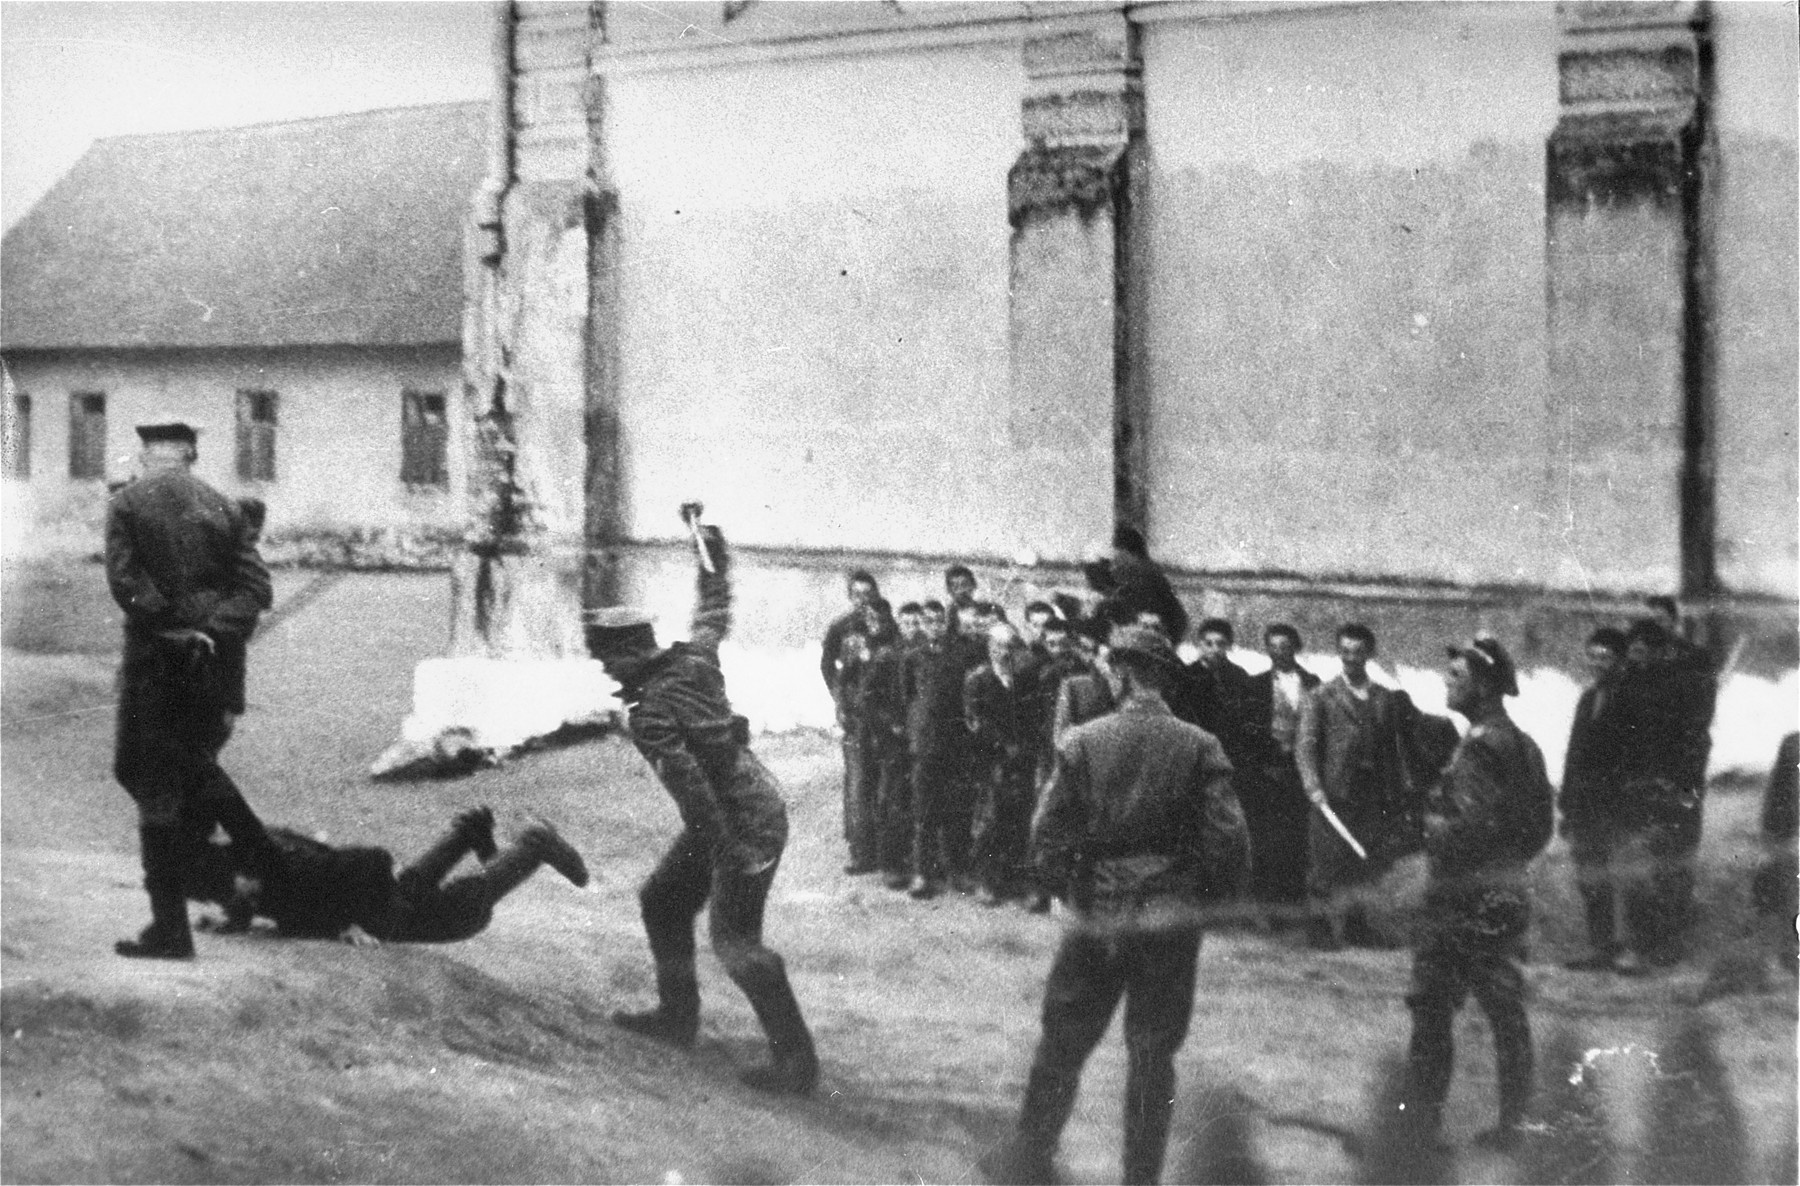 Camp guards beat a prisoner at the Cieszanow labor camp.